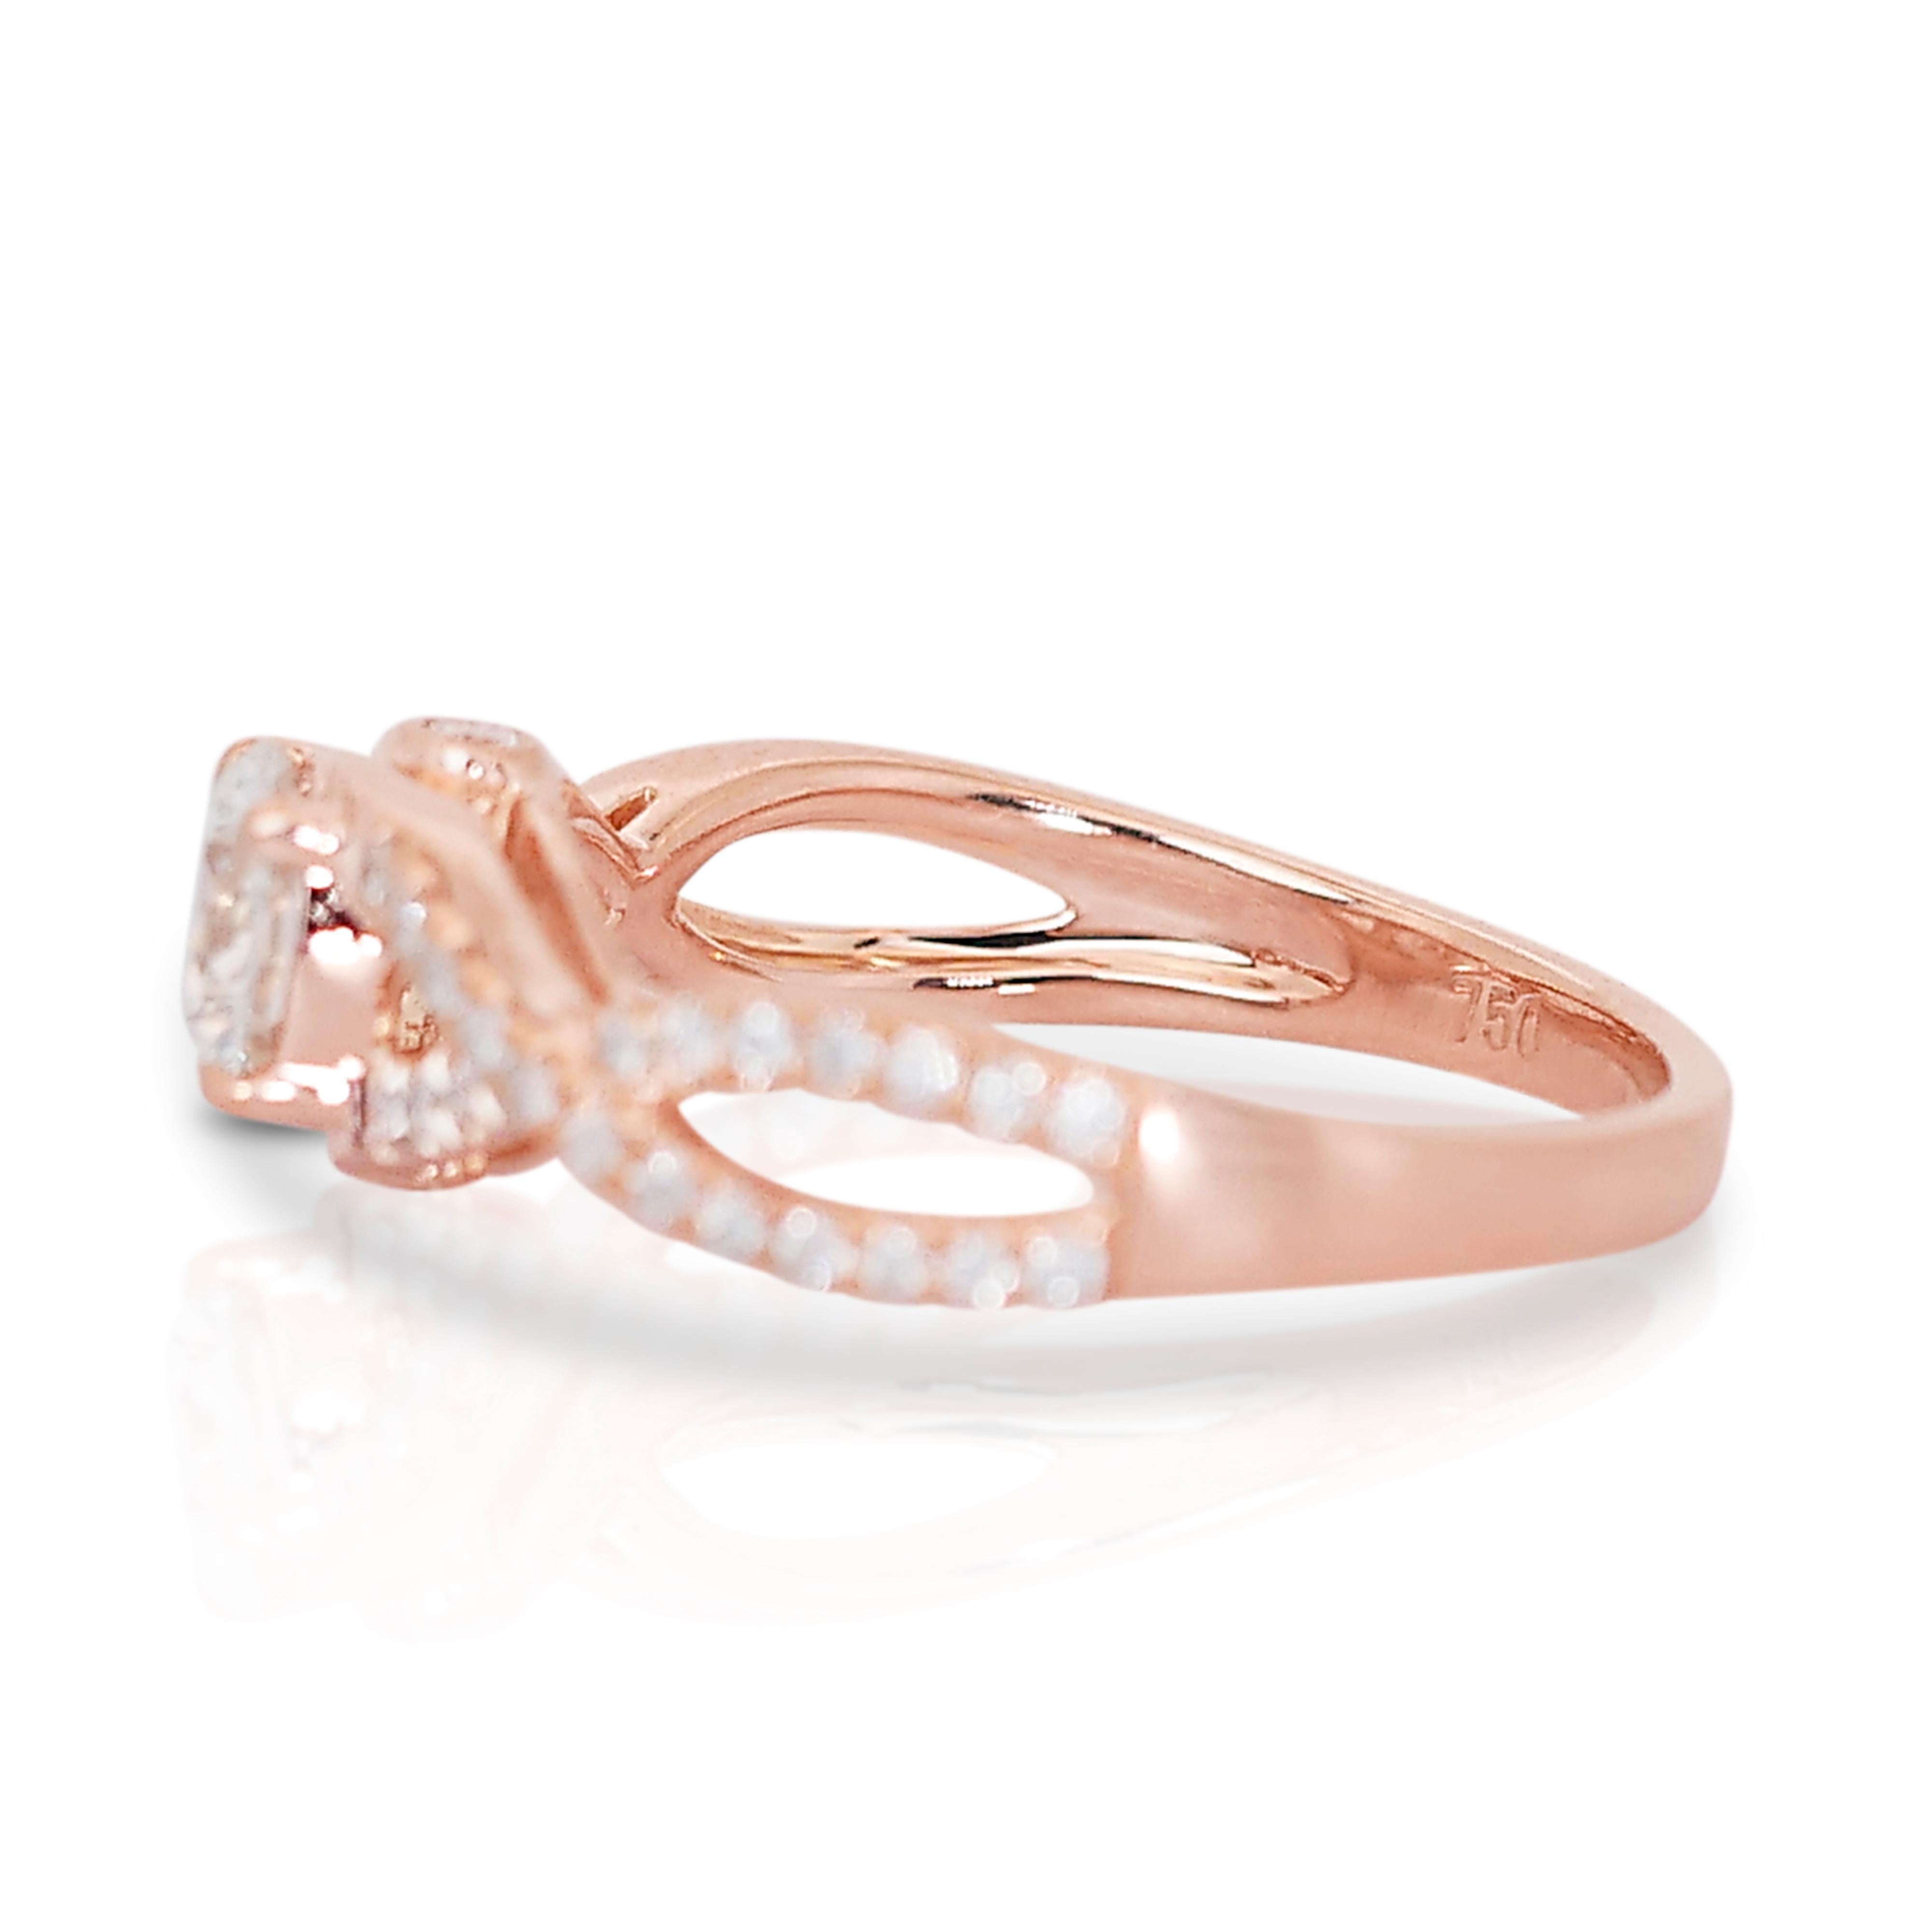 Brilliant Cut Beautiful 18K Rose Gold Infinity Natural Diamond Ring w/0.91ct - GIA Certified For Sale